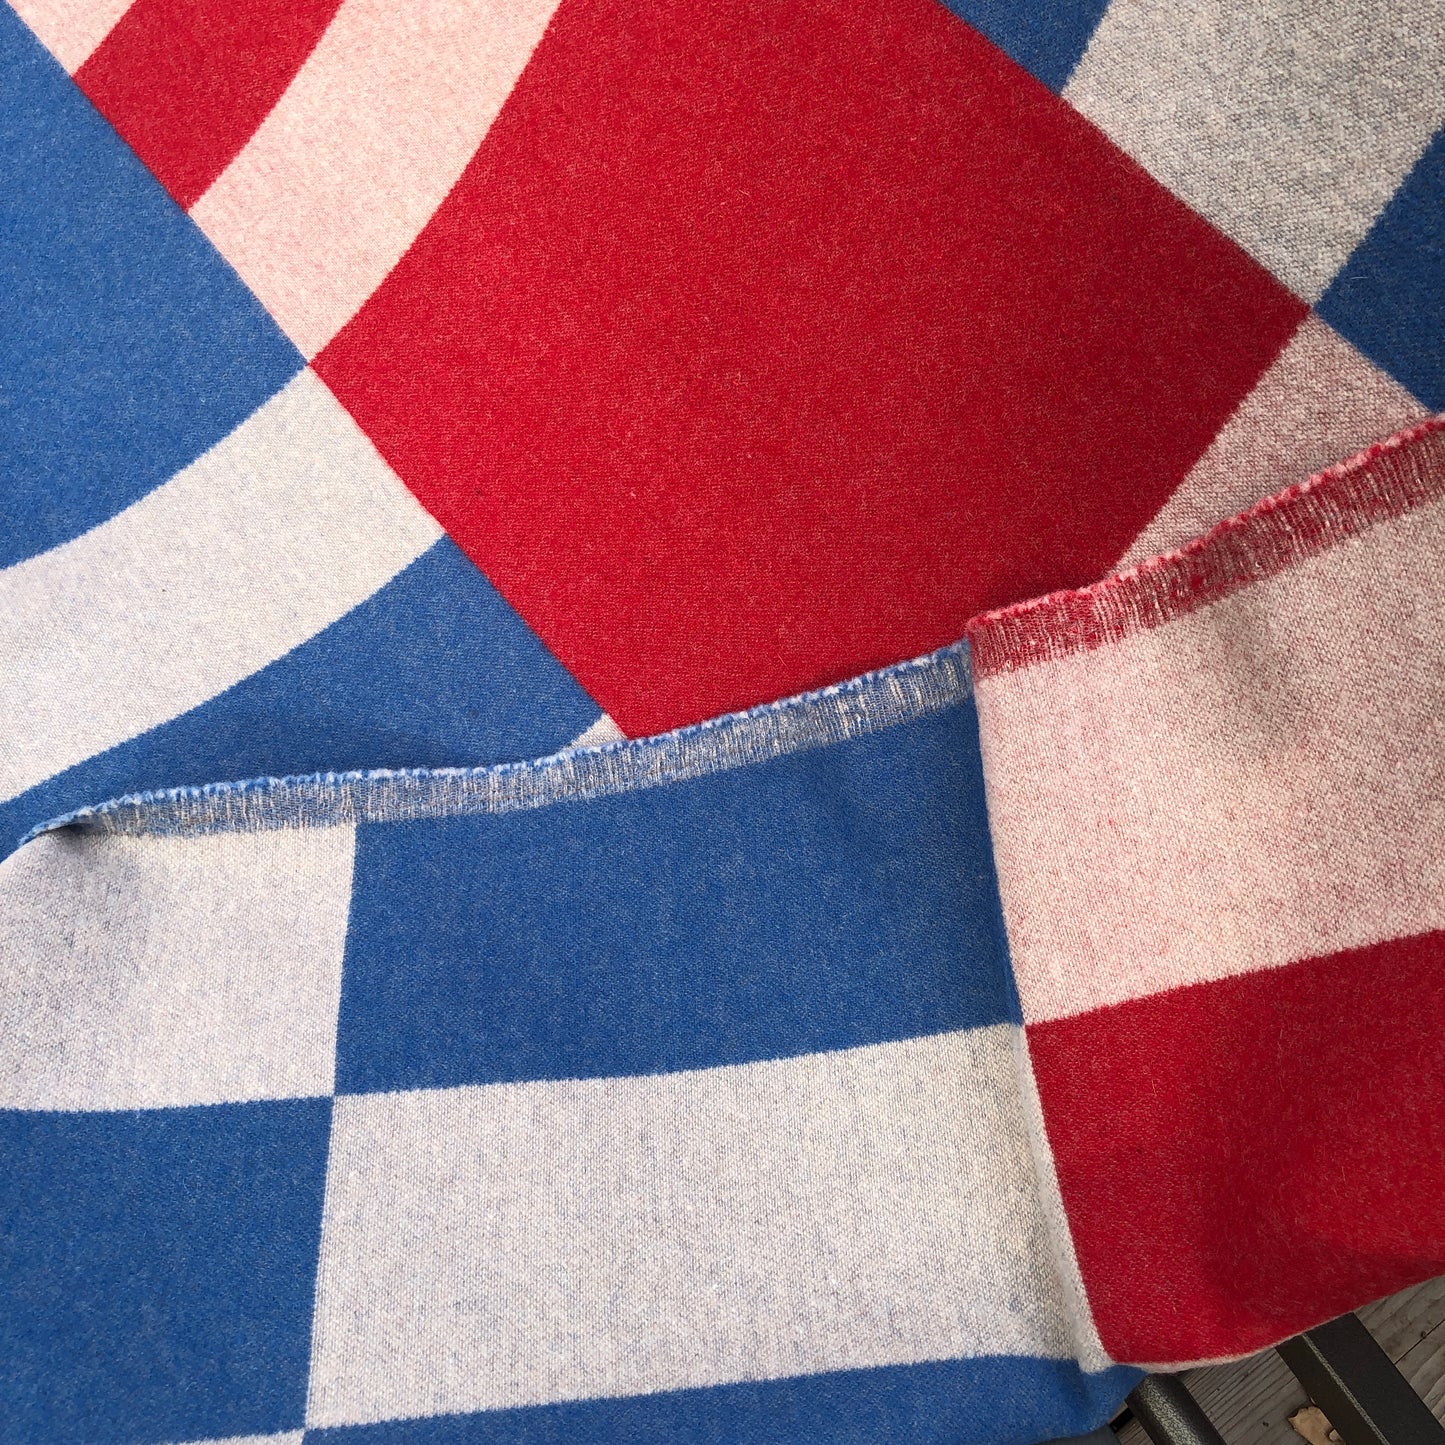 Wool Fabric -  Red/Blue/White